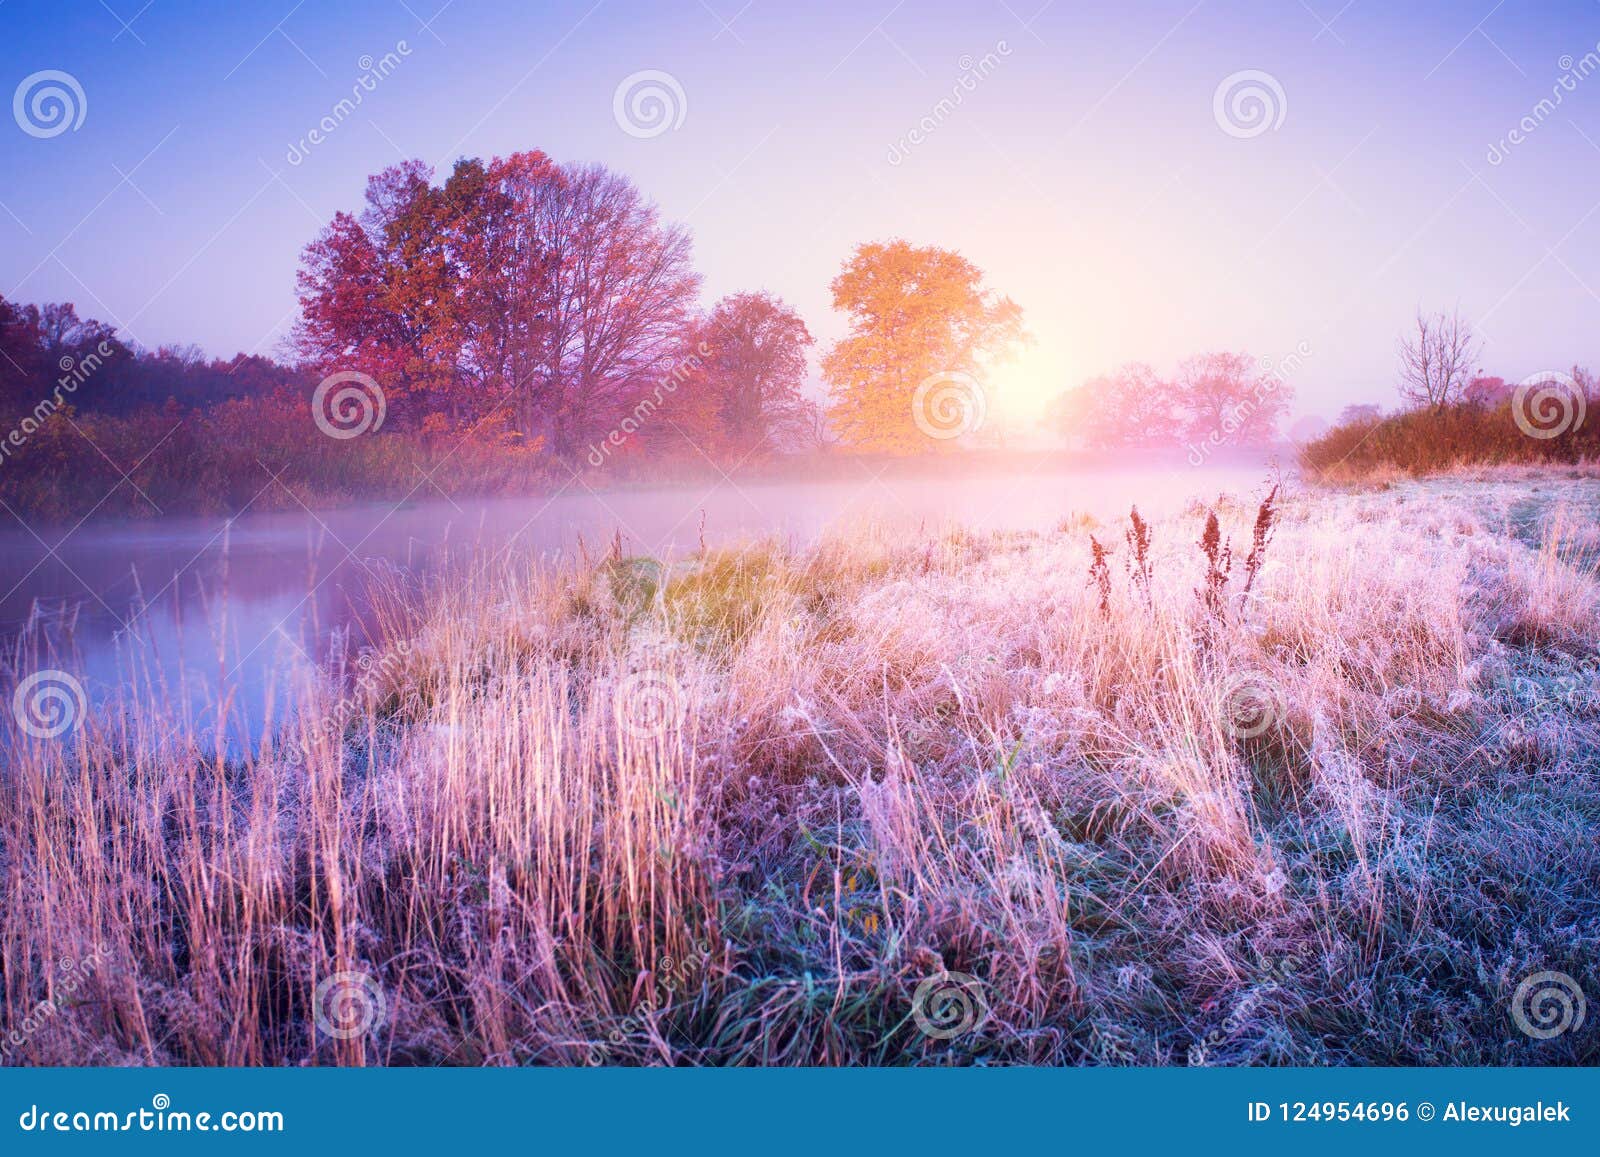 november landscape. autumn morning with colorful trees and hoarfrost on the ground.